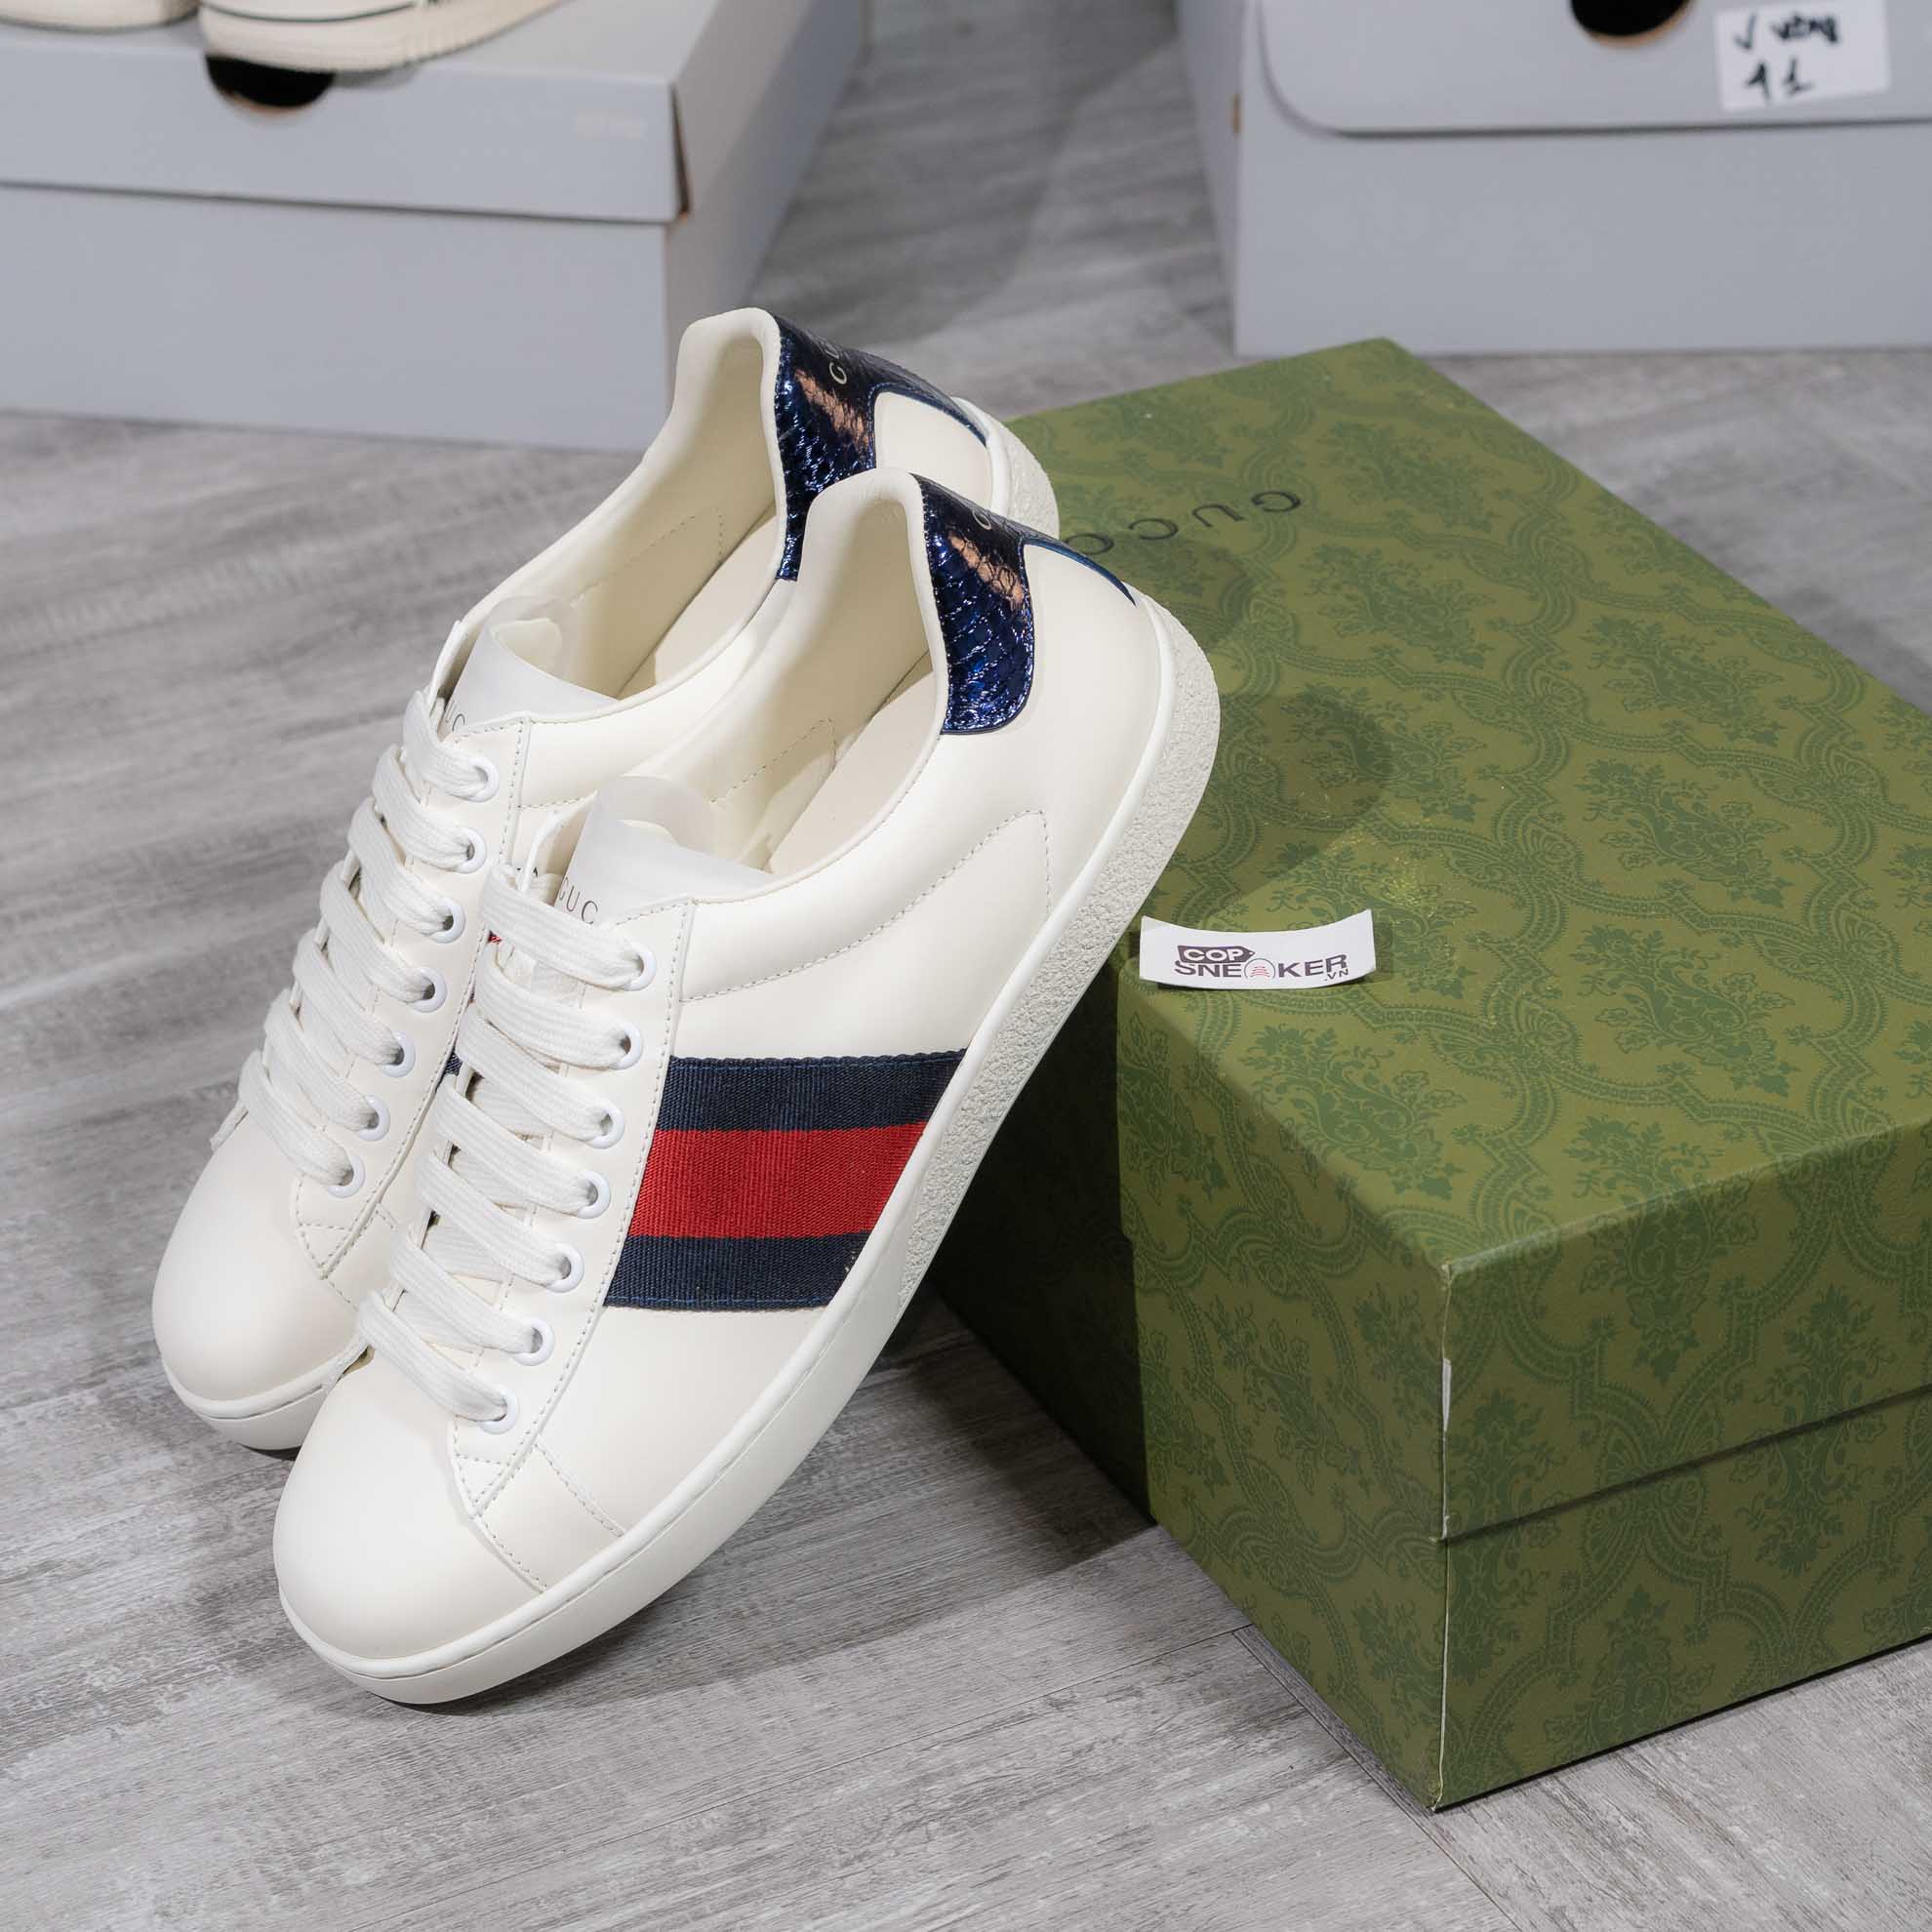 Giày Gucci Ace White Blue Red Like Auth 